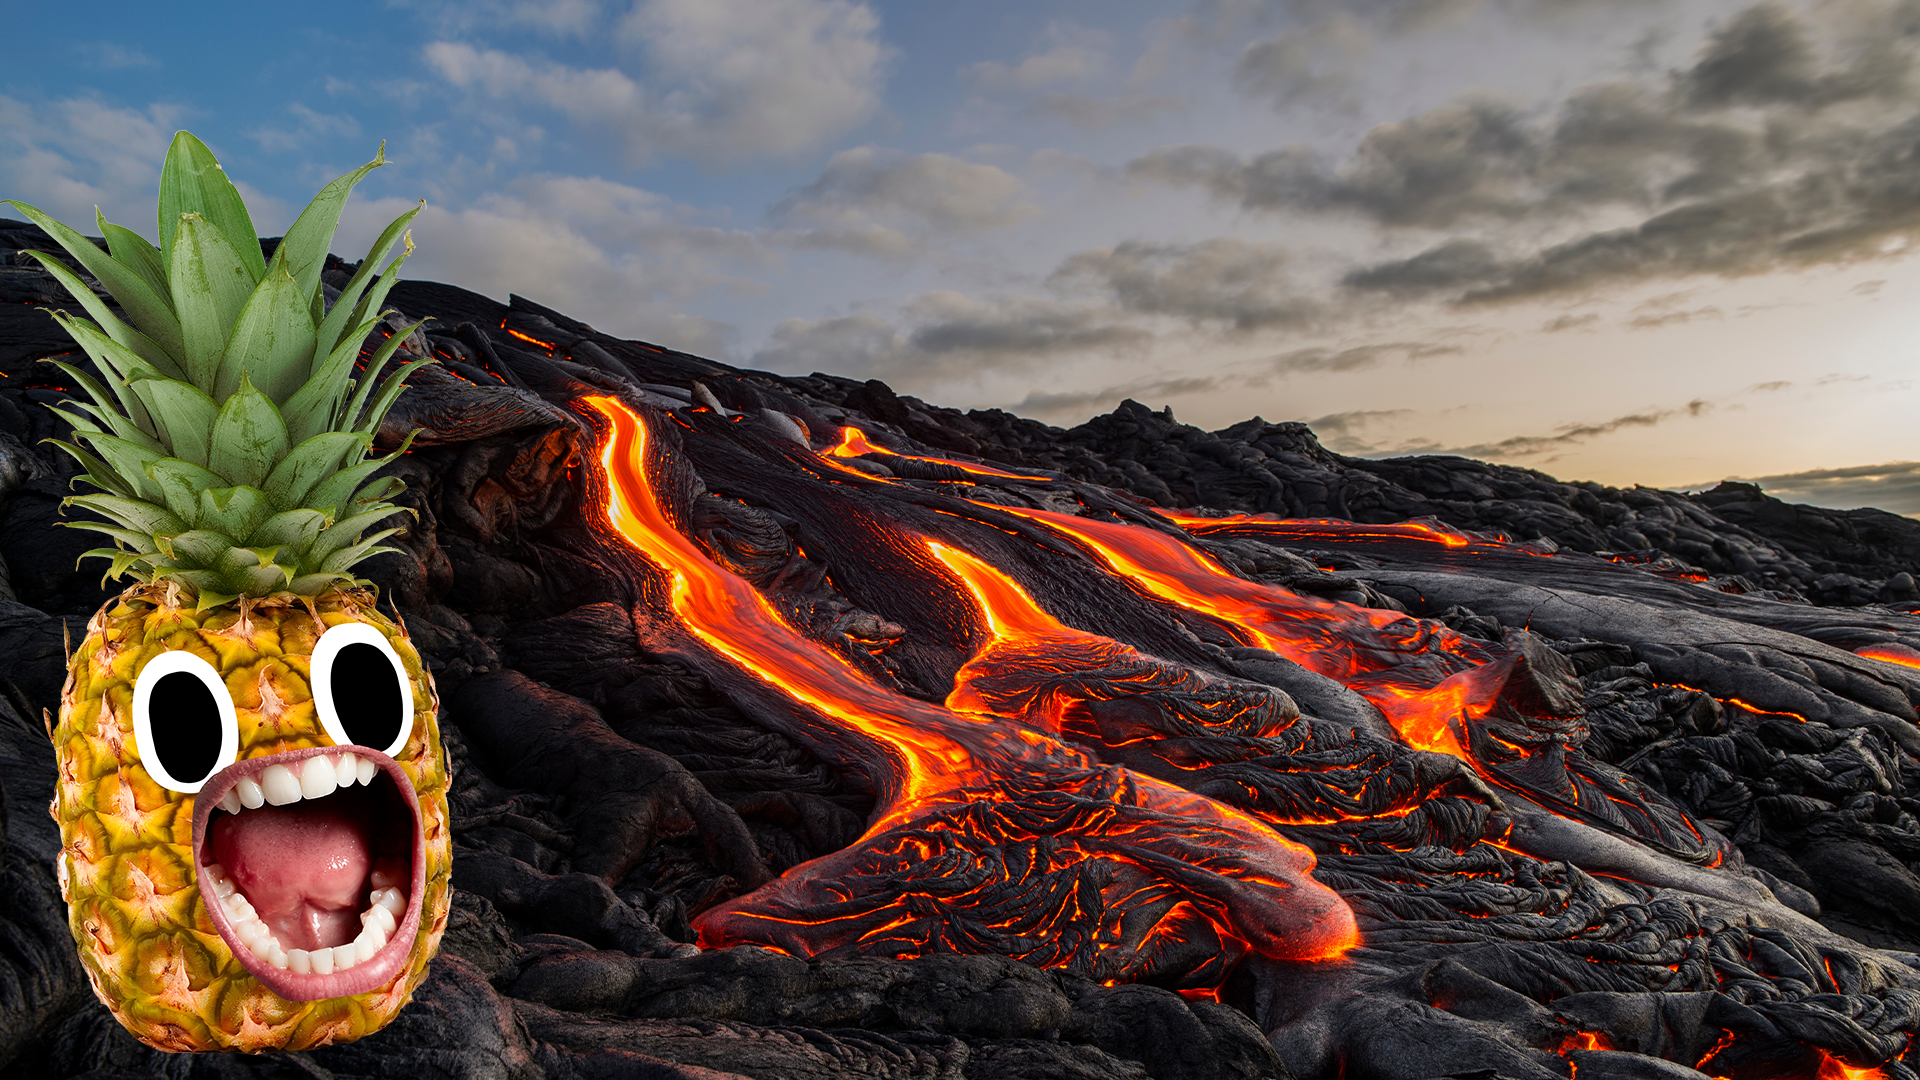 Lava flowing and screaming pineapple 